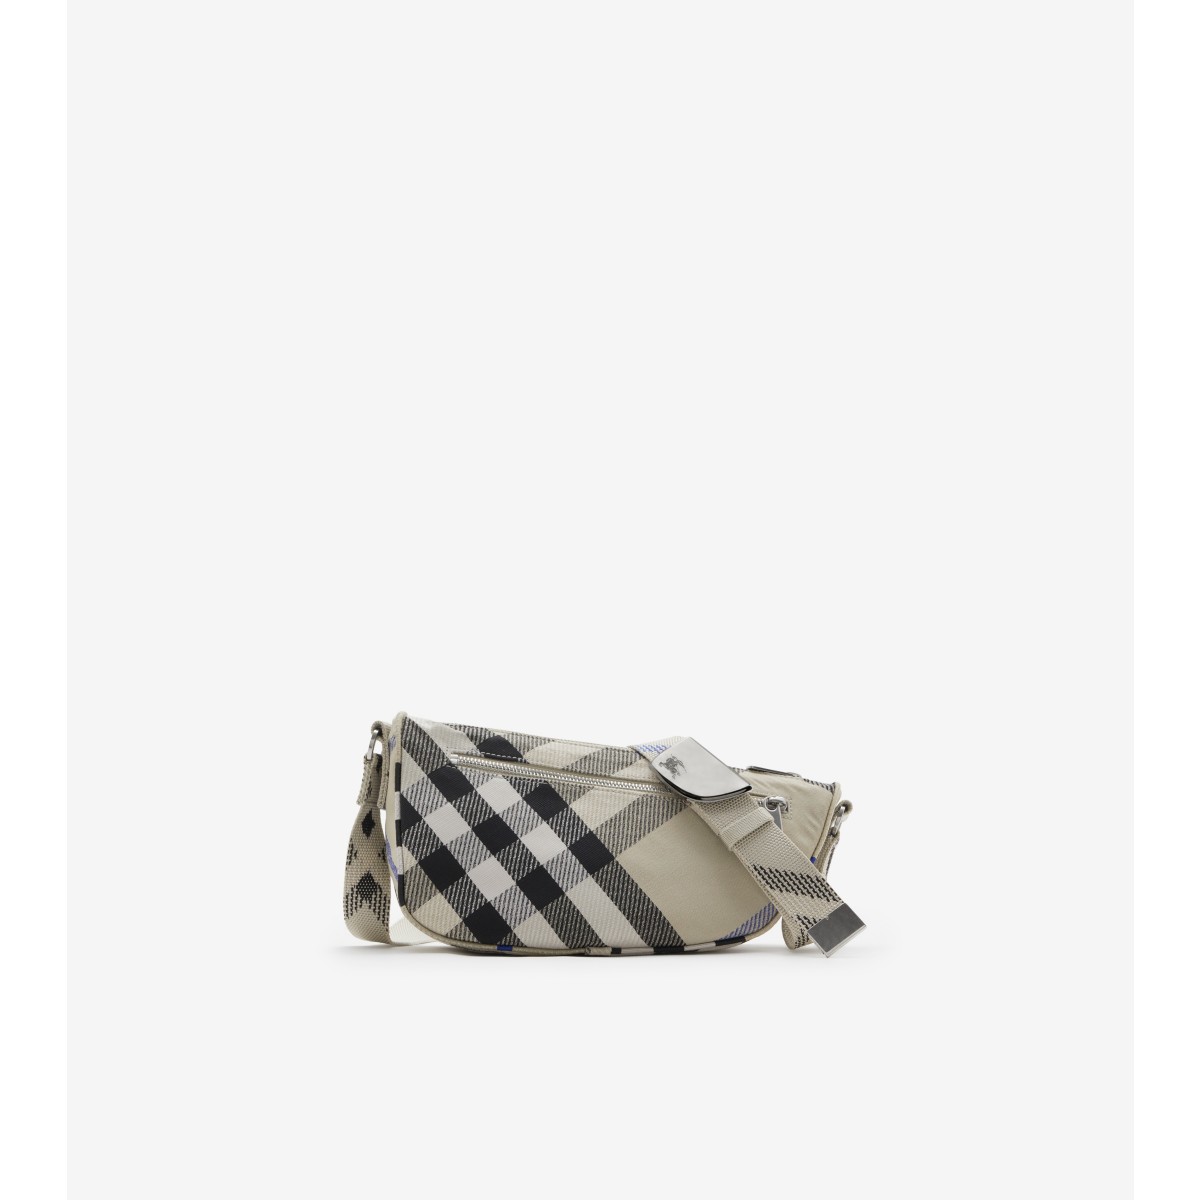 Burberry Small Shield Messenger Bag In Neutral